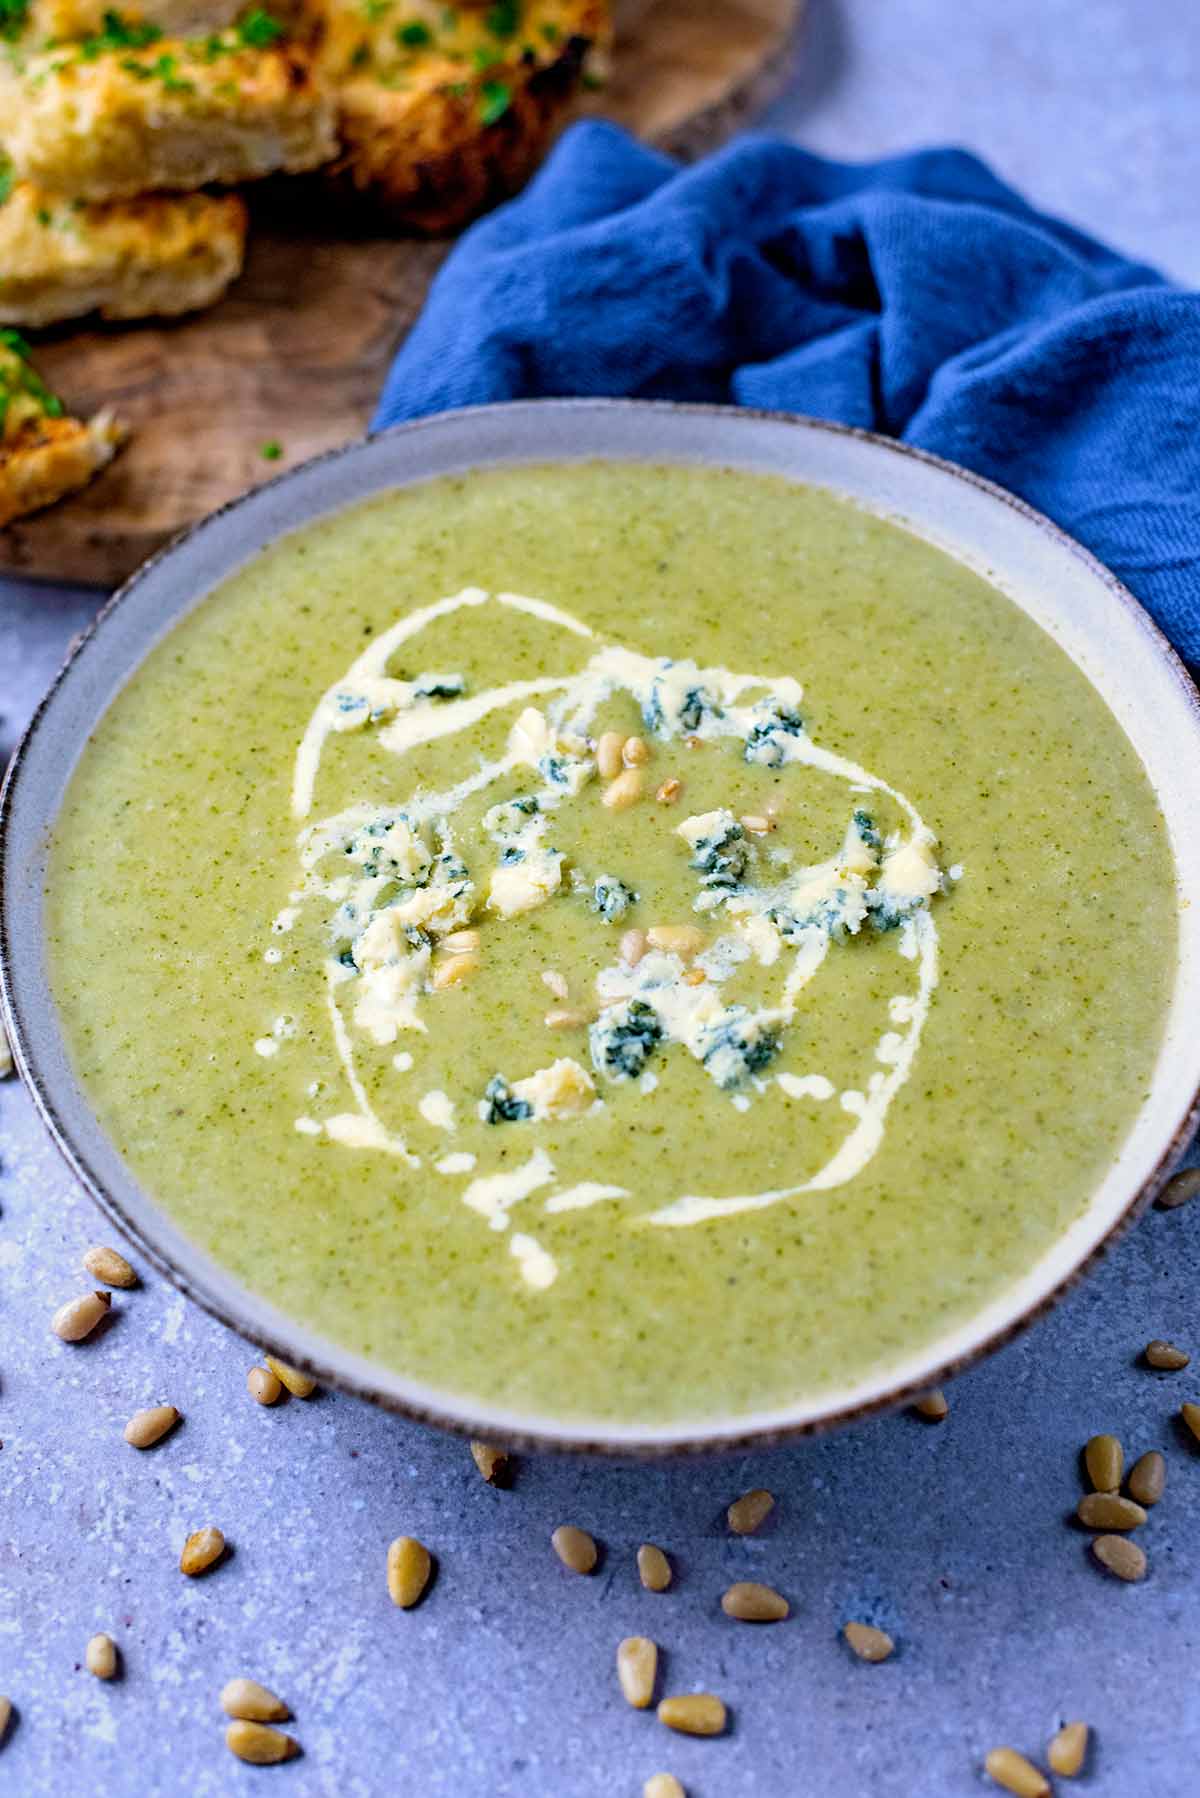 Broccoli and stilton soup in a bowl in front of a blue towel.